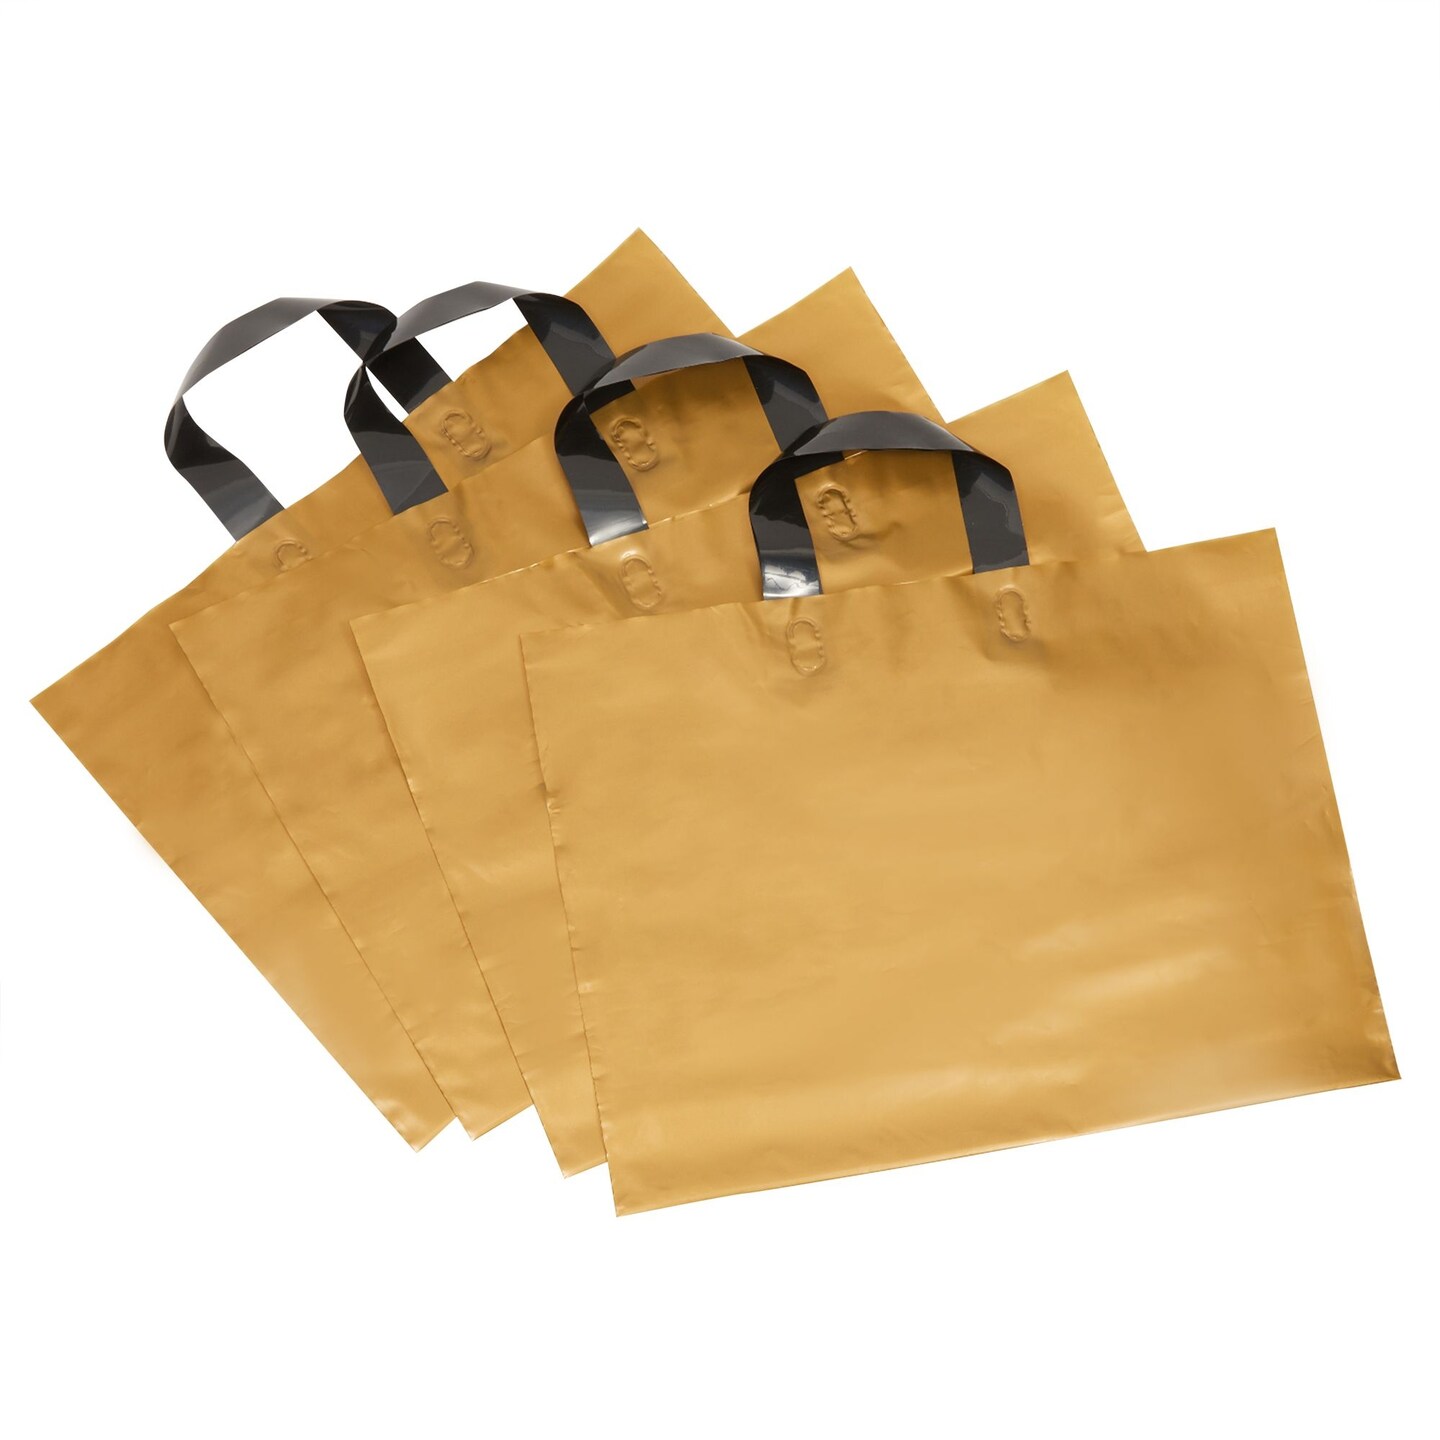 Nationalhcs - Are plastic shoipping bags taking over your home?